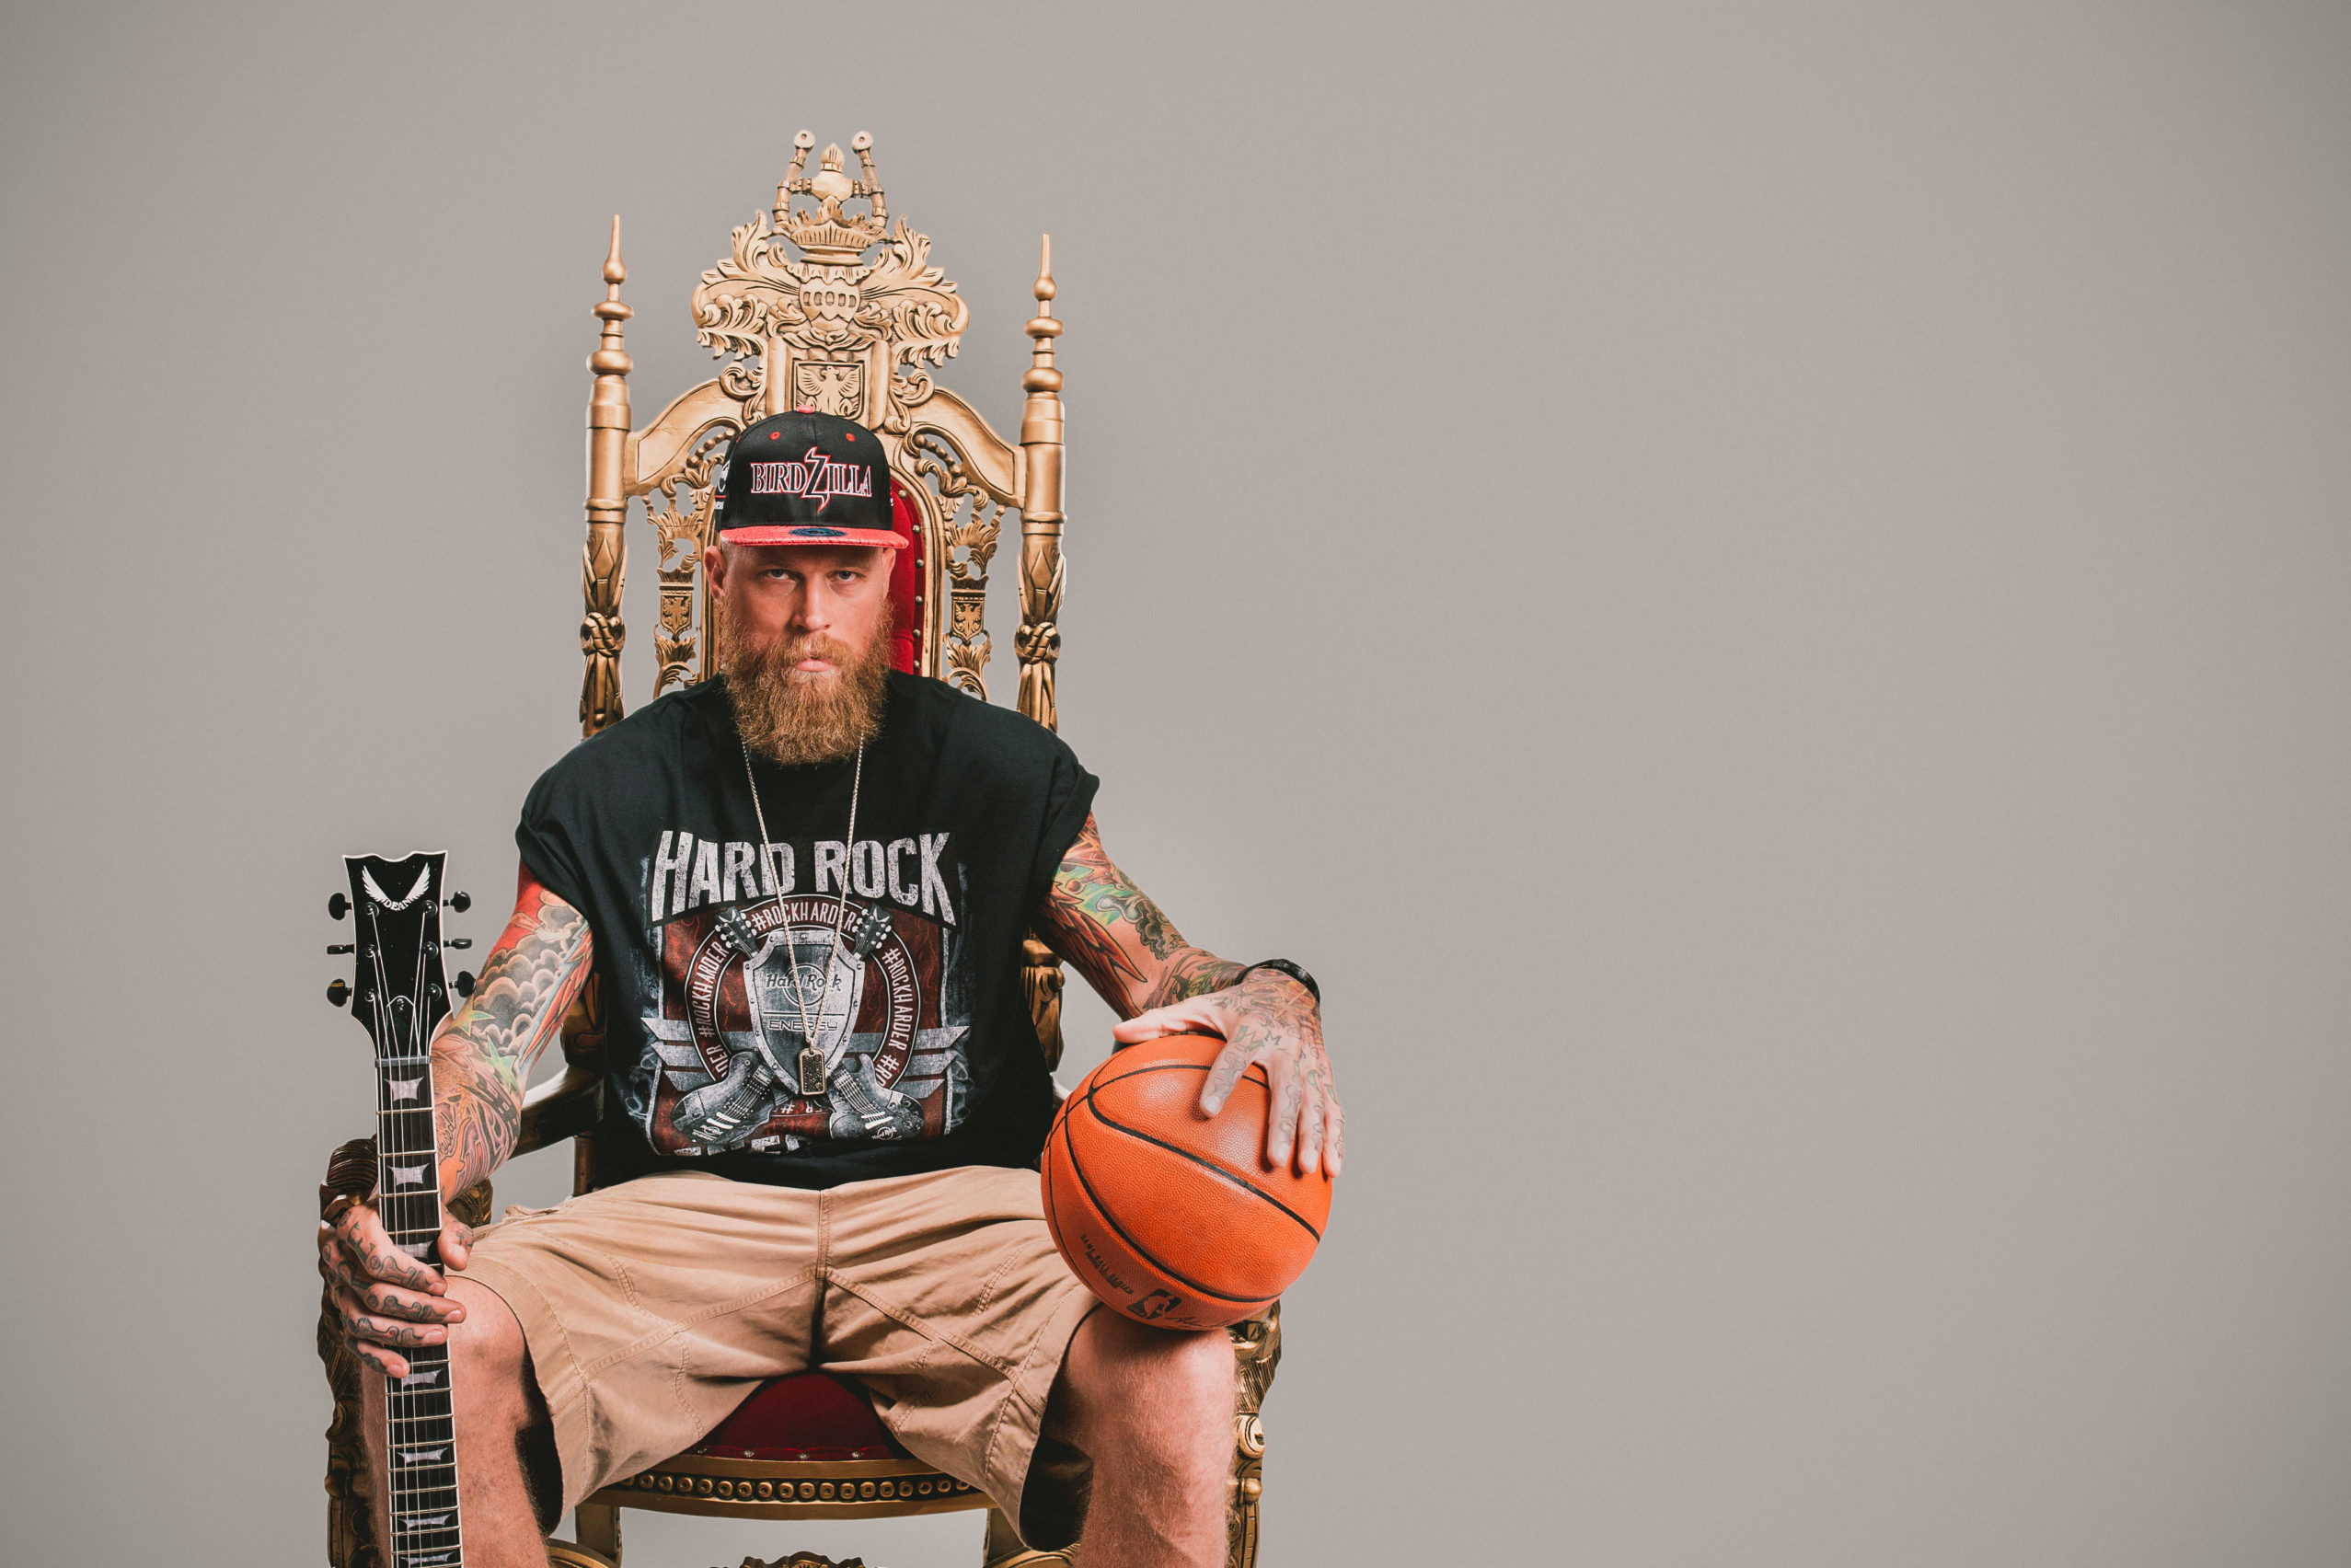 Production Resources Props Database Male model wearing black cap and t shirt sitting on a throne holding a basketball and a guitar